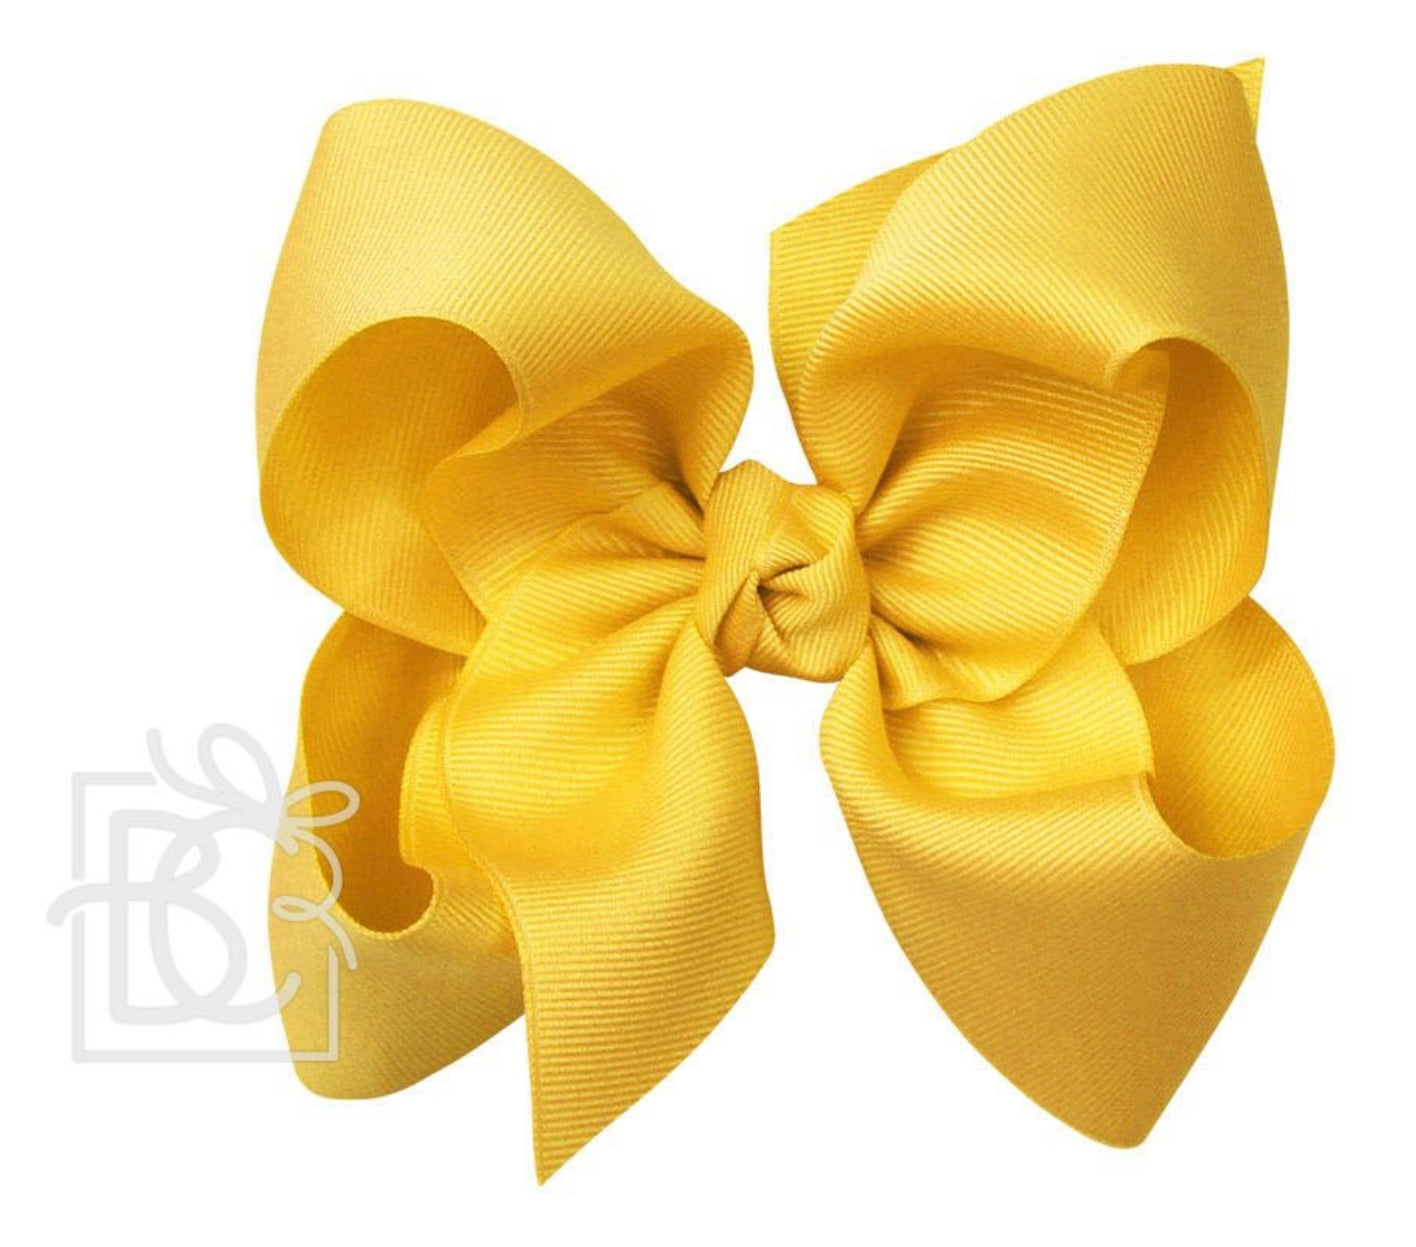 Beyond Creations Hairbows Bright Yellow